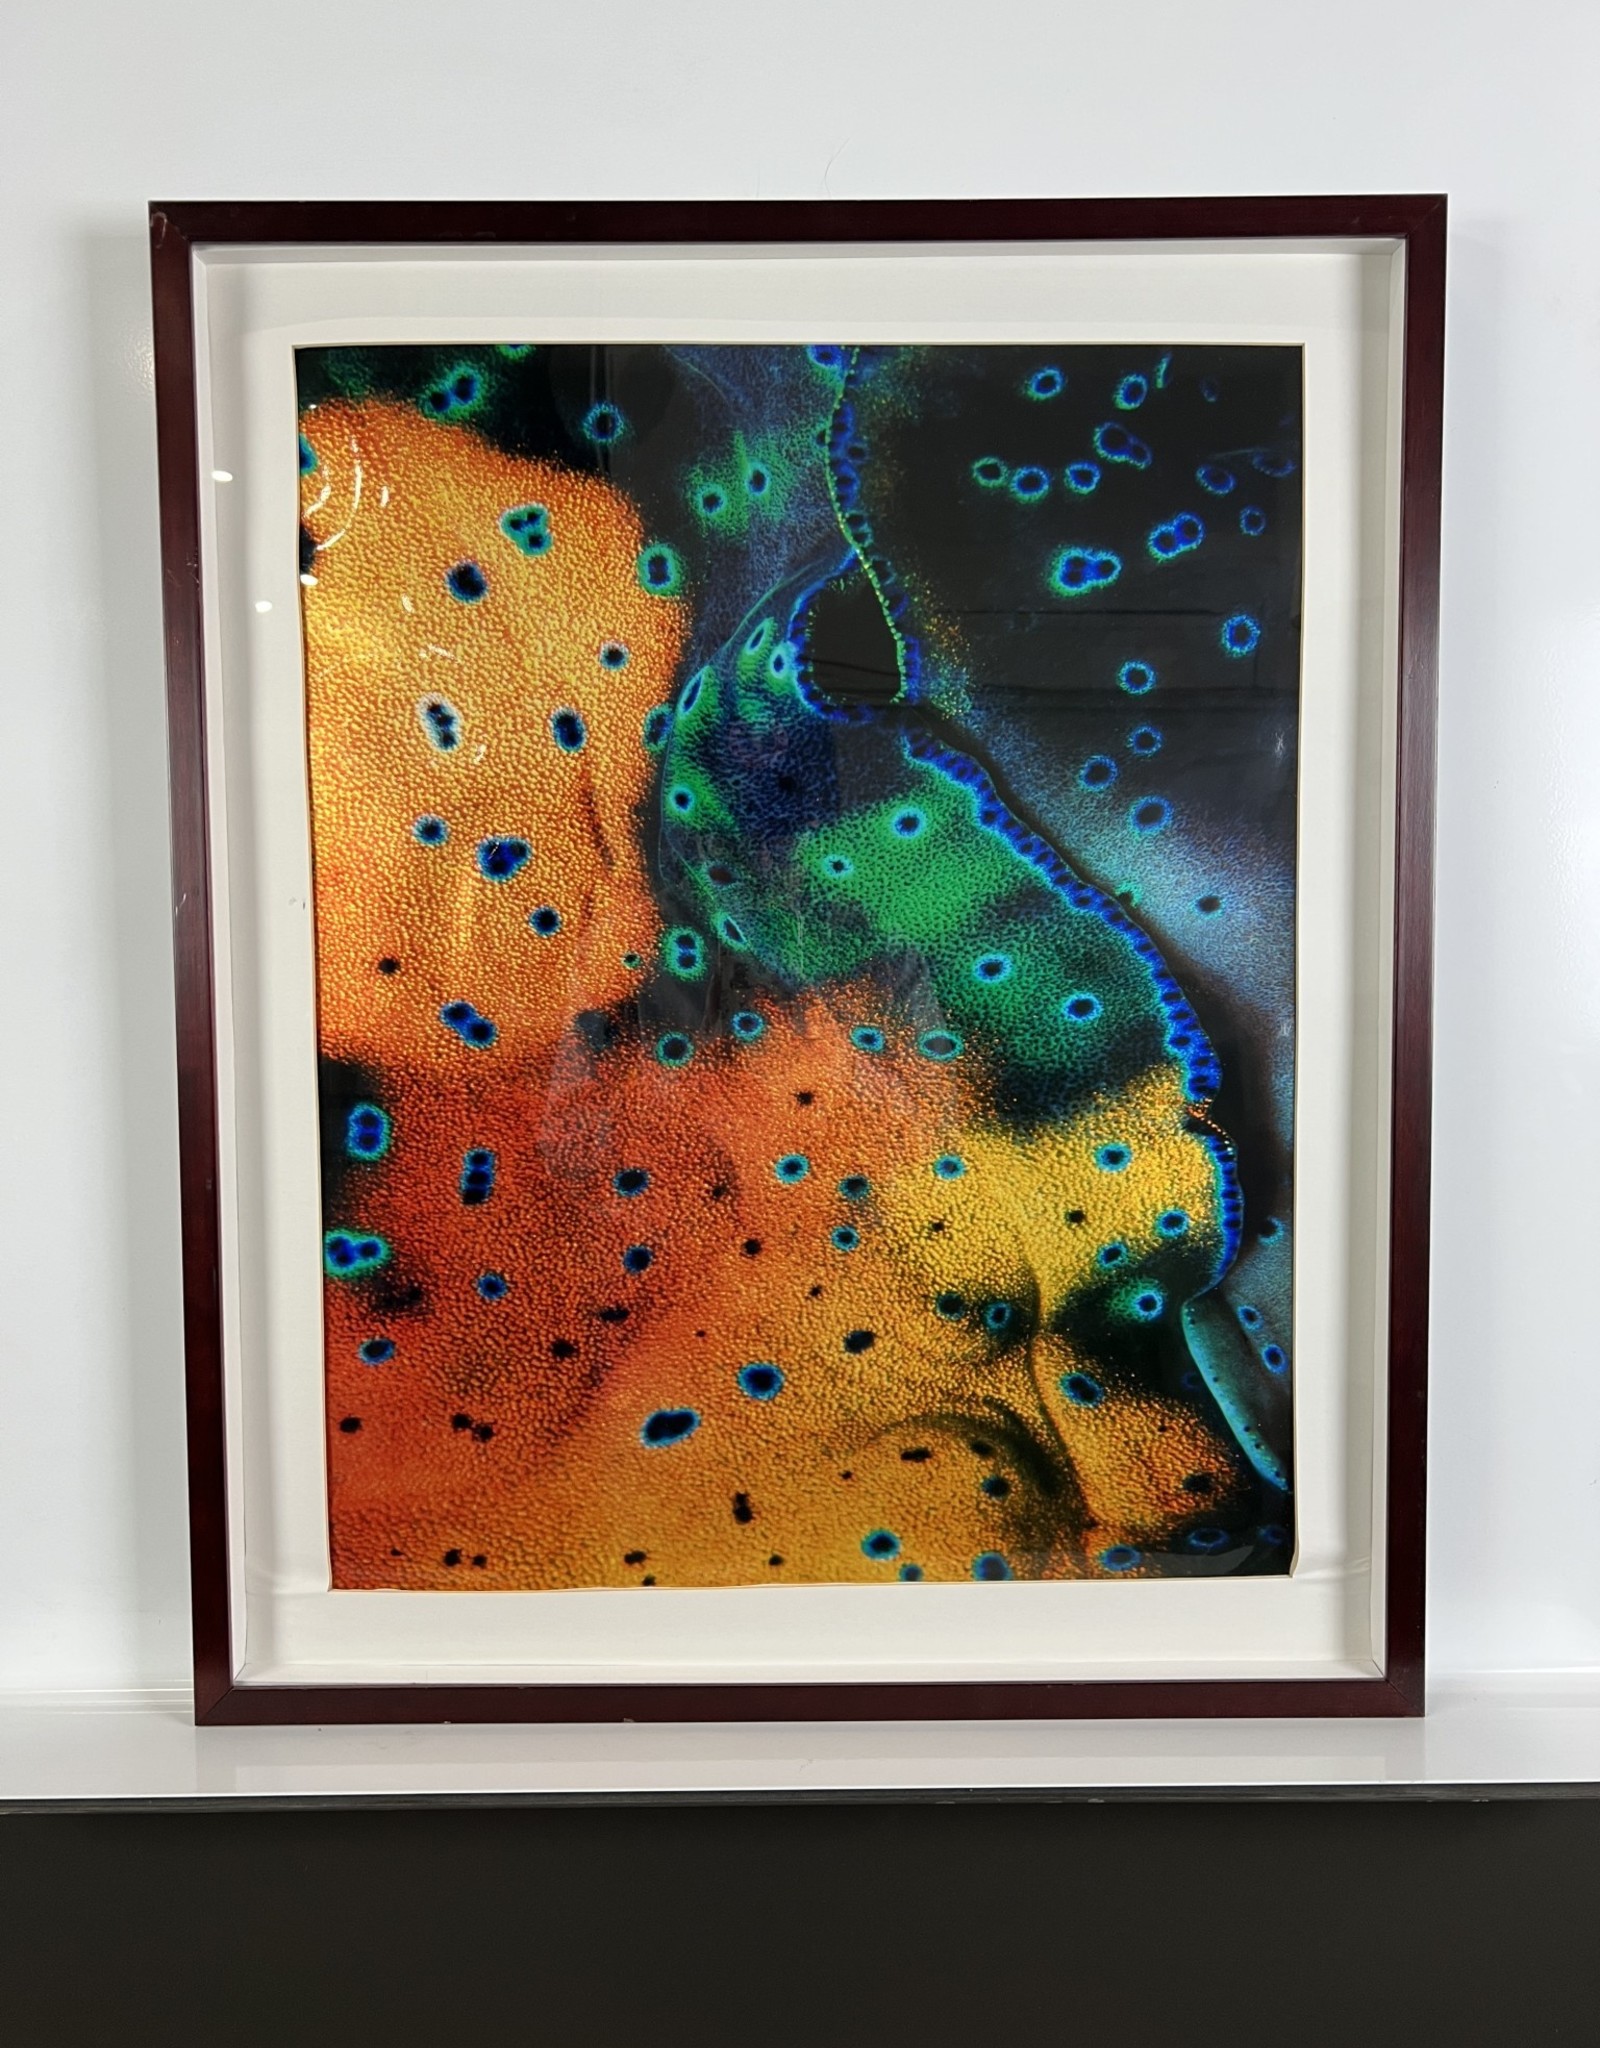 Peacock in a Magical World, framed inkjet photograph